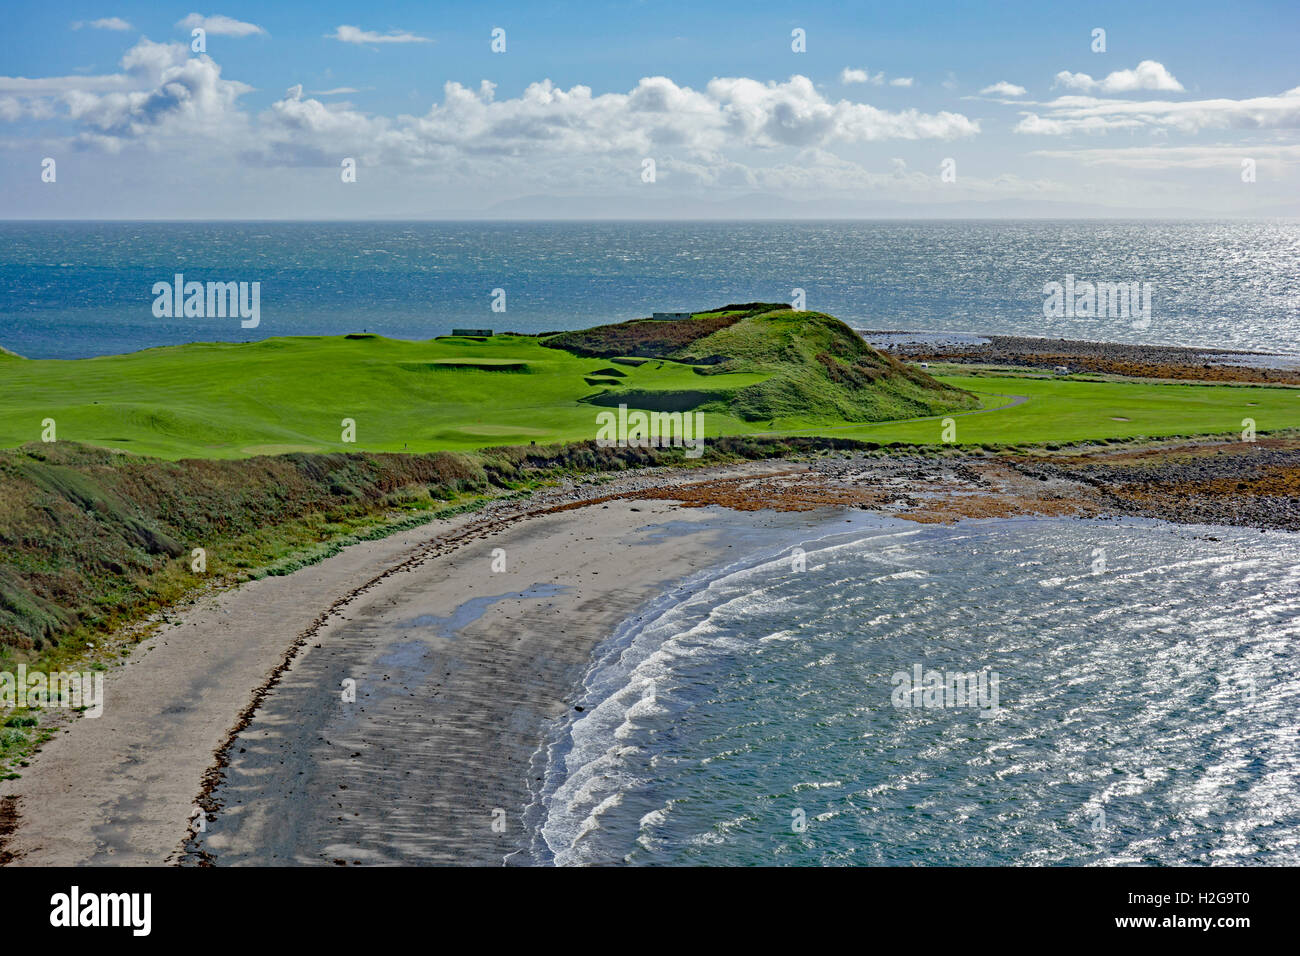 St Medans Golf Course at Monreith near Port William in Dumfries and Galloway, southwest Scotland. On coast of Luce Bay. Stock Photo